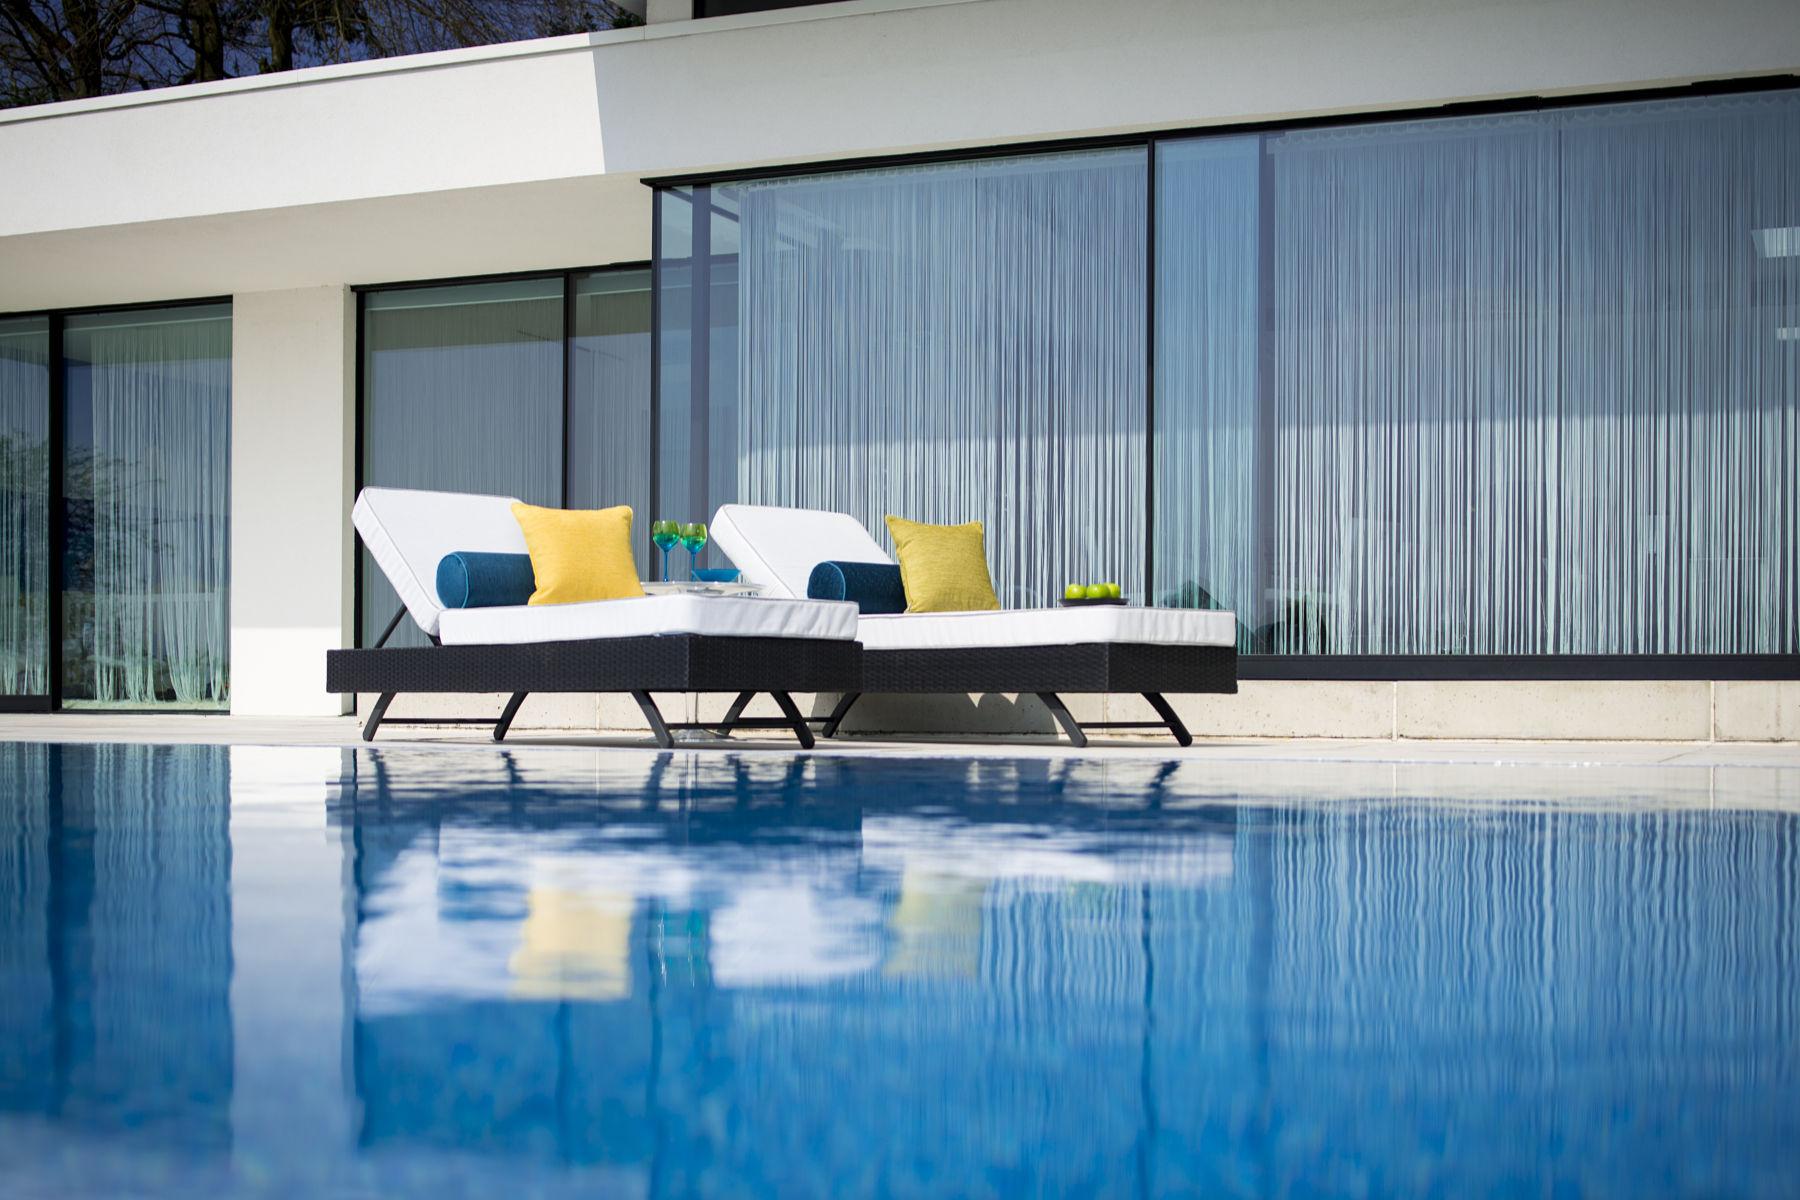 Luxury Furnishing Fabrics From Lawn to Living Room, Sundeck to Spa, Any Weather, Anywhere